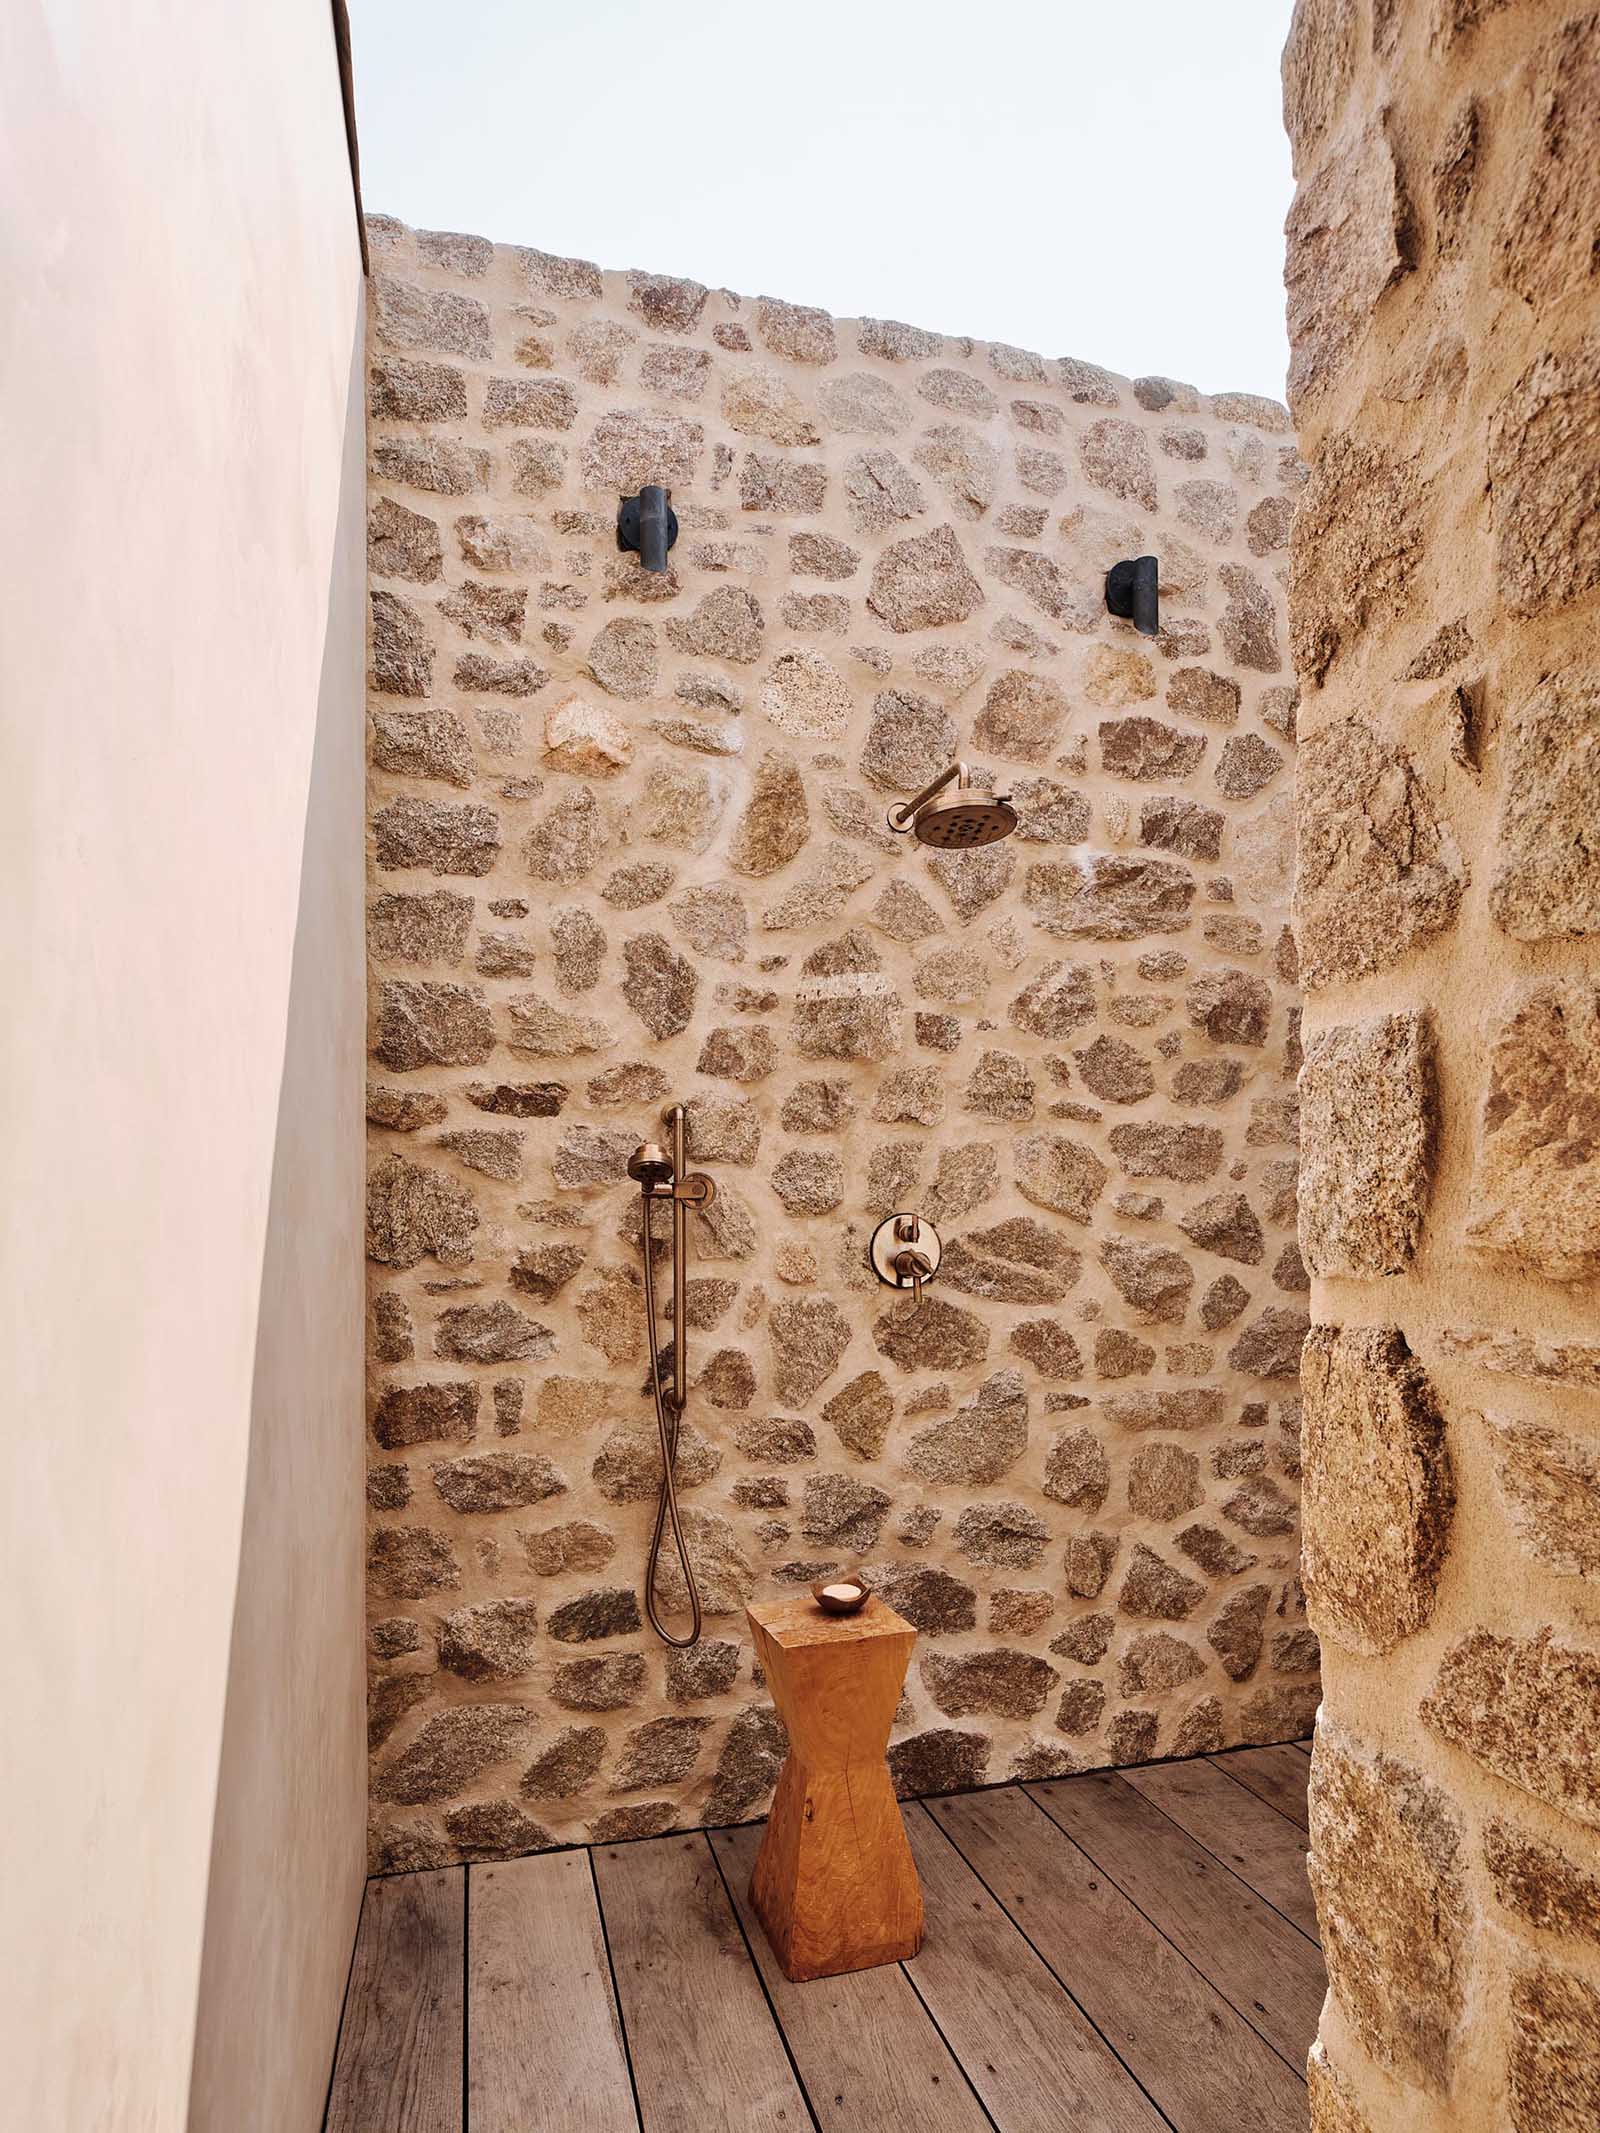 An outdoor shower with stone walls and wood flooring.